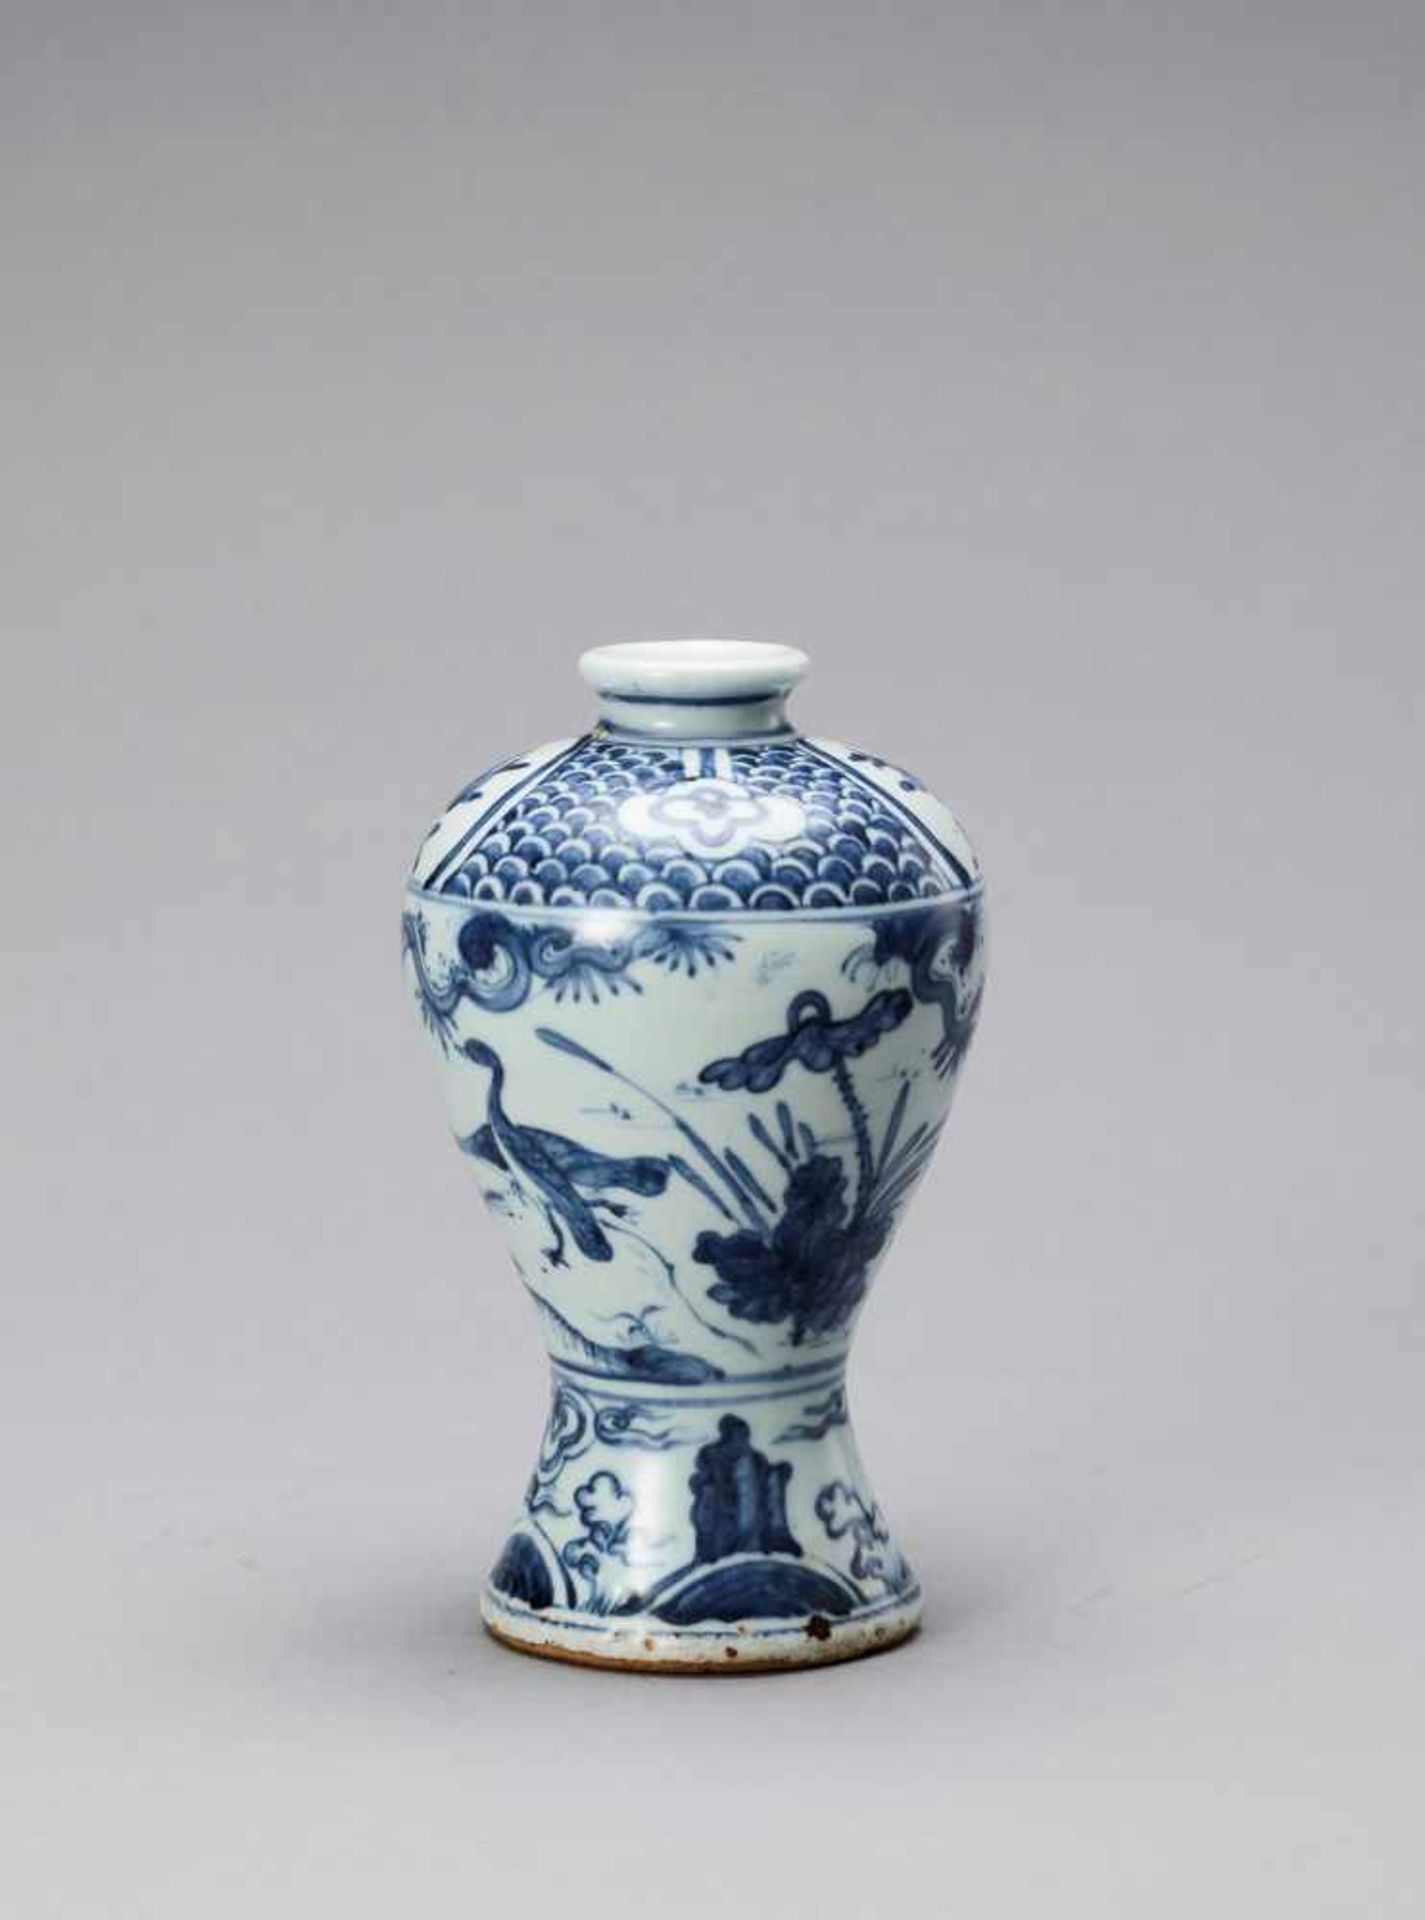 A BLUE AND WHITE GLAZED PORCELAIN MEIPING VASE, LATE MING - Image 3 of 6